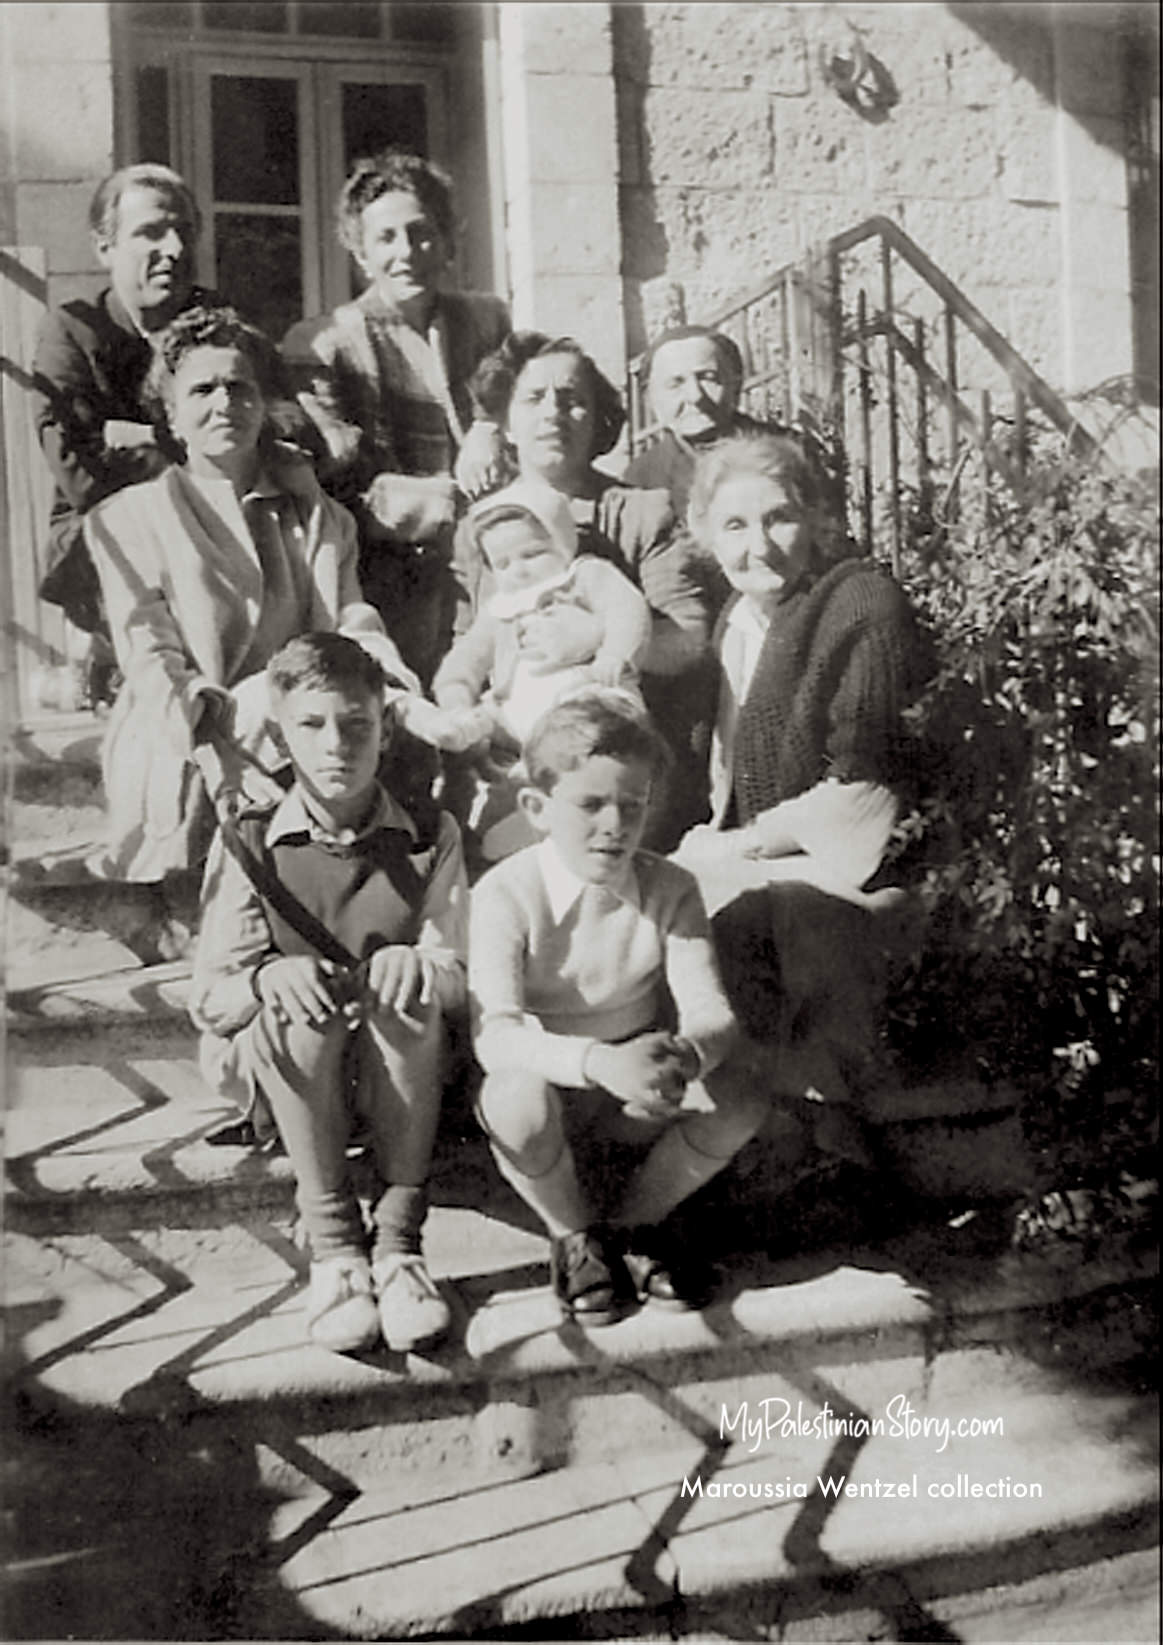 On the steps of the Gaitanopoulos house. Top row: Marika on the right. Middle row: Anna on the left, Kalliope on the right. Bottom row: John on the left, Erifeely on the right - Jerusalem, mid 1940s